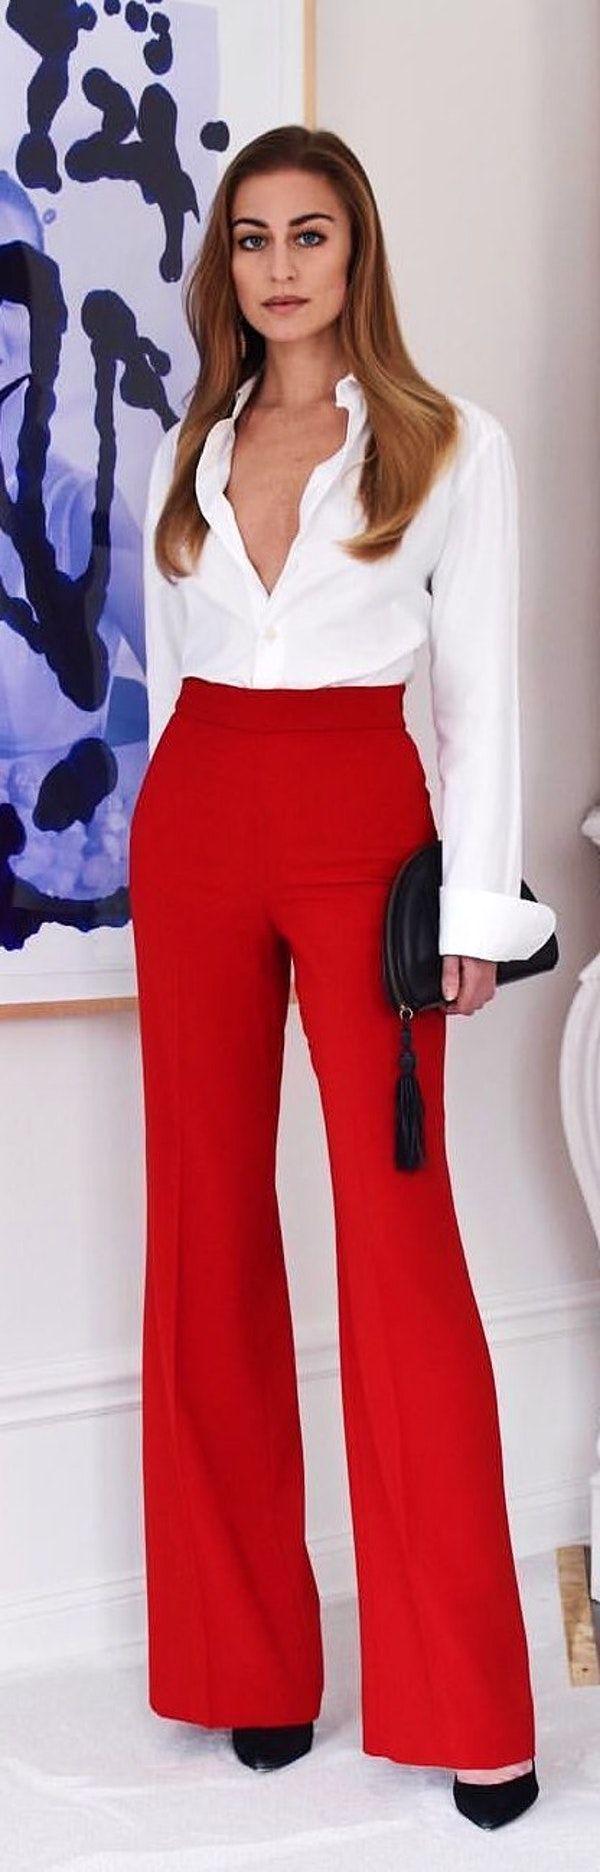 Blonde Woman in White Shirt and Red Trousers Stock Photo  Image of  fashion business 188002030